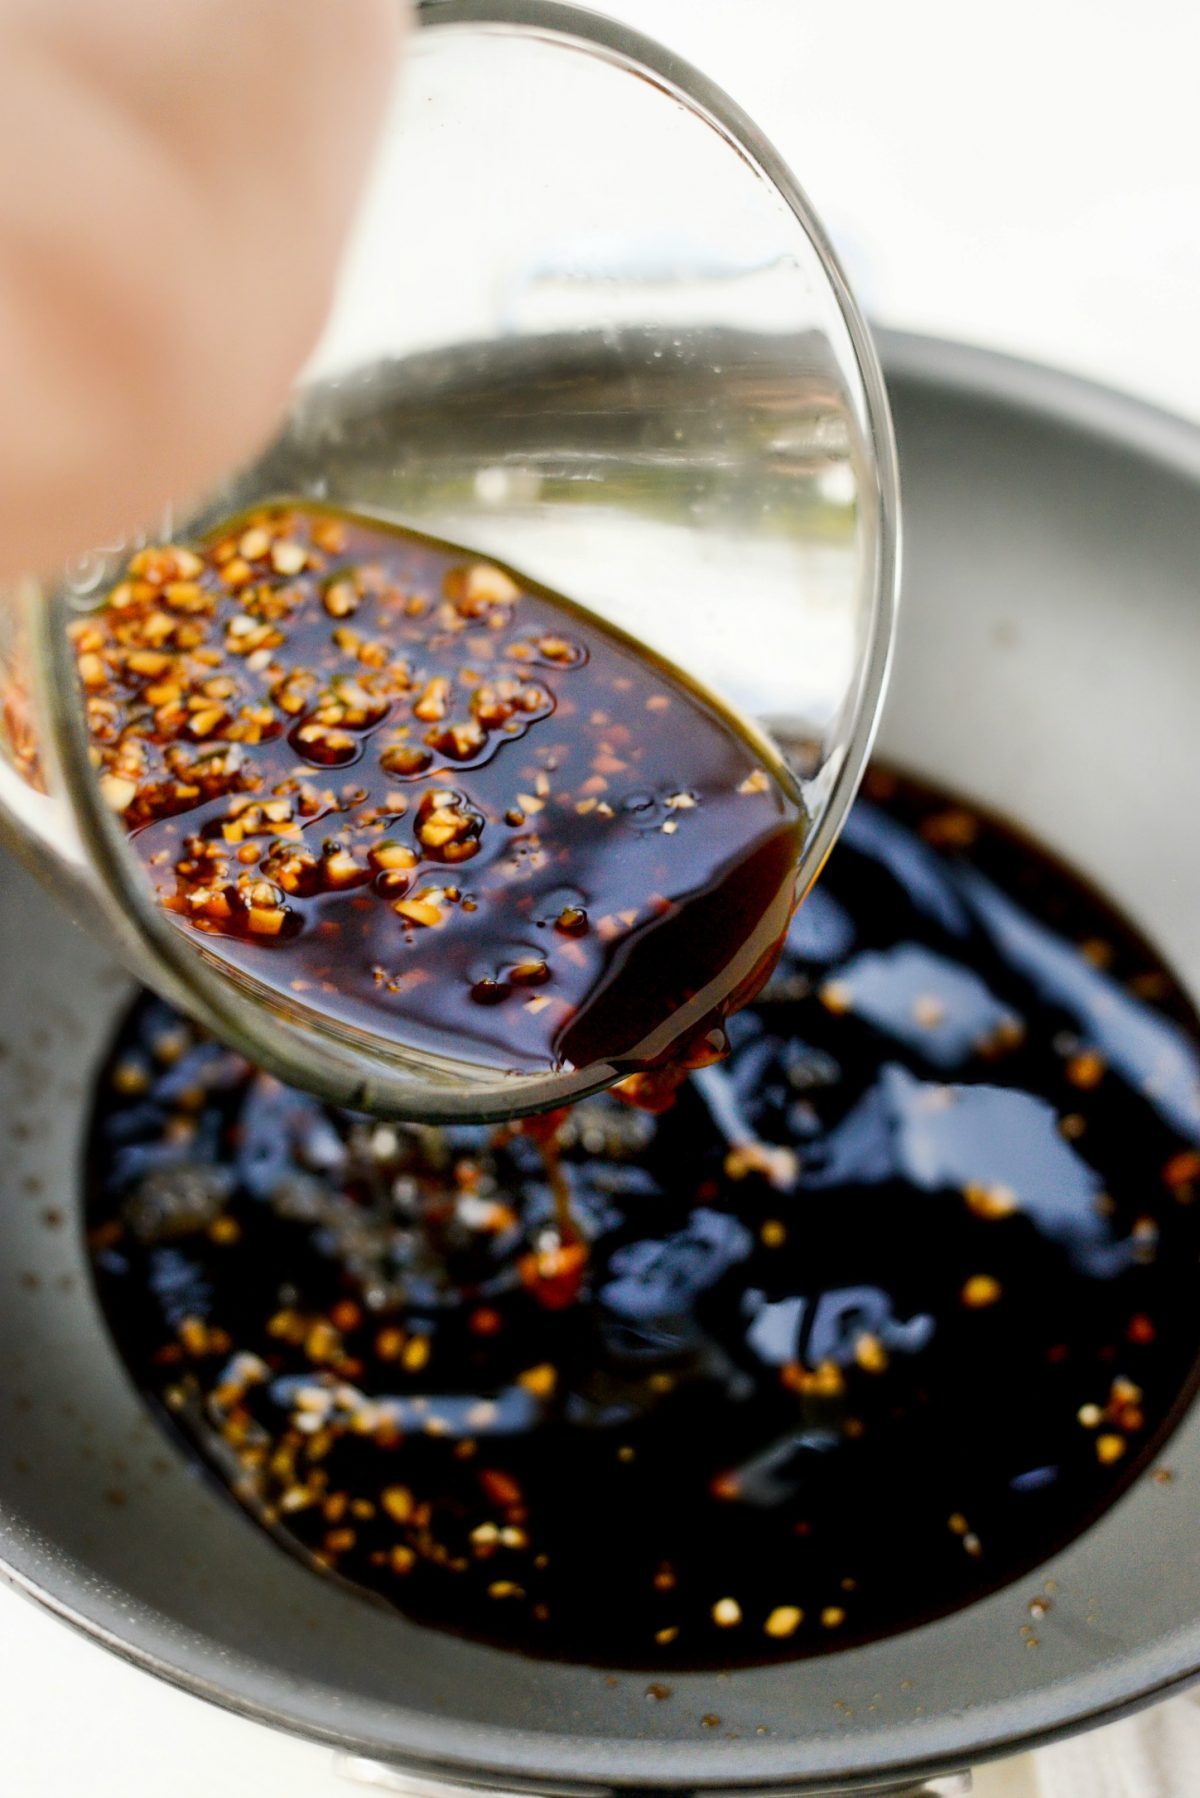 remove most oil from pan and pour in sauce.